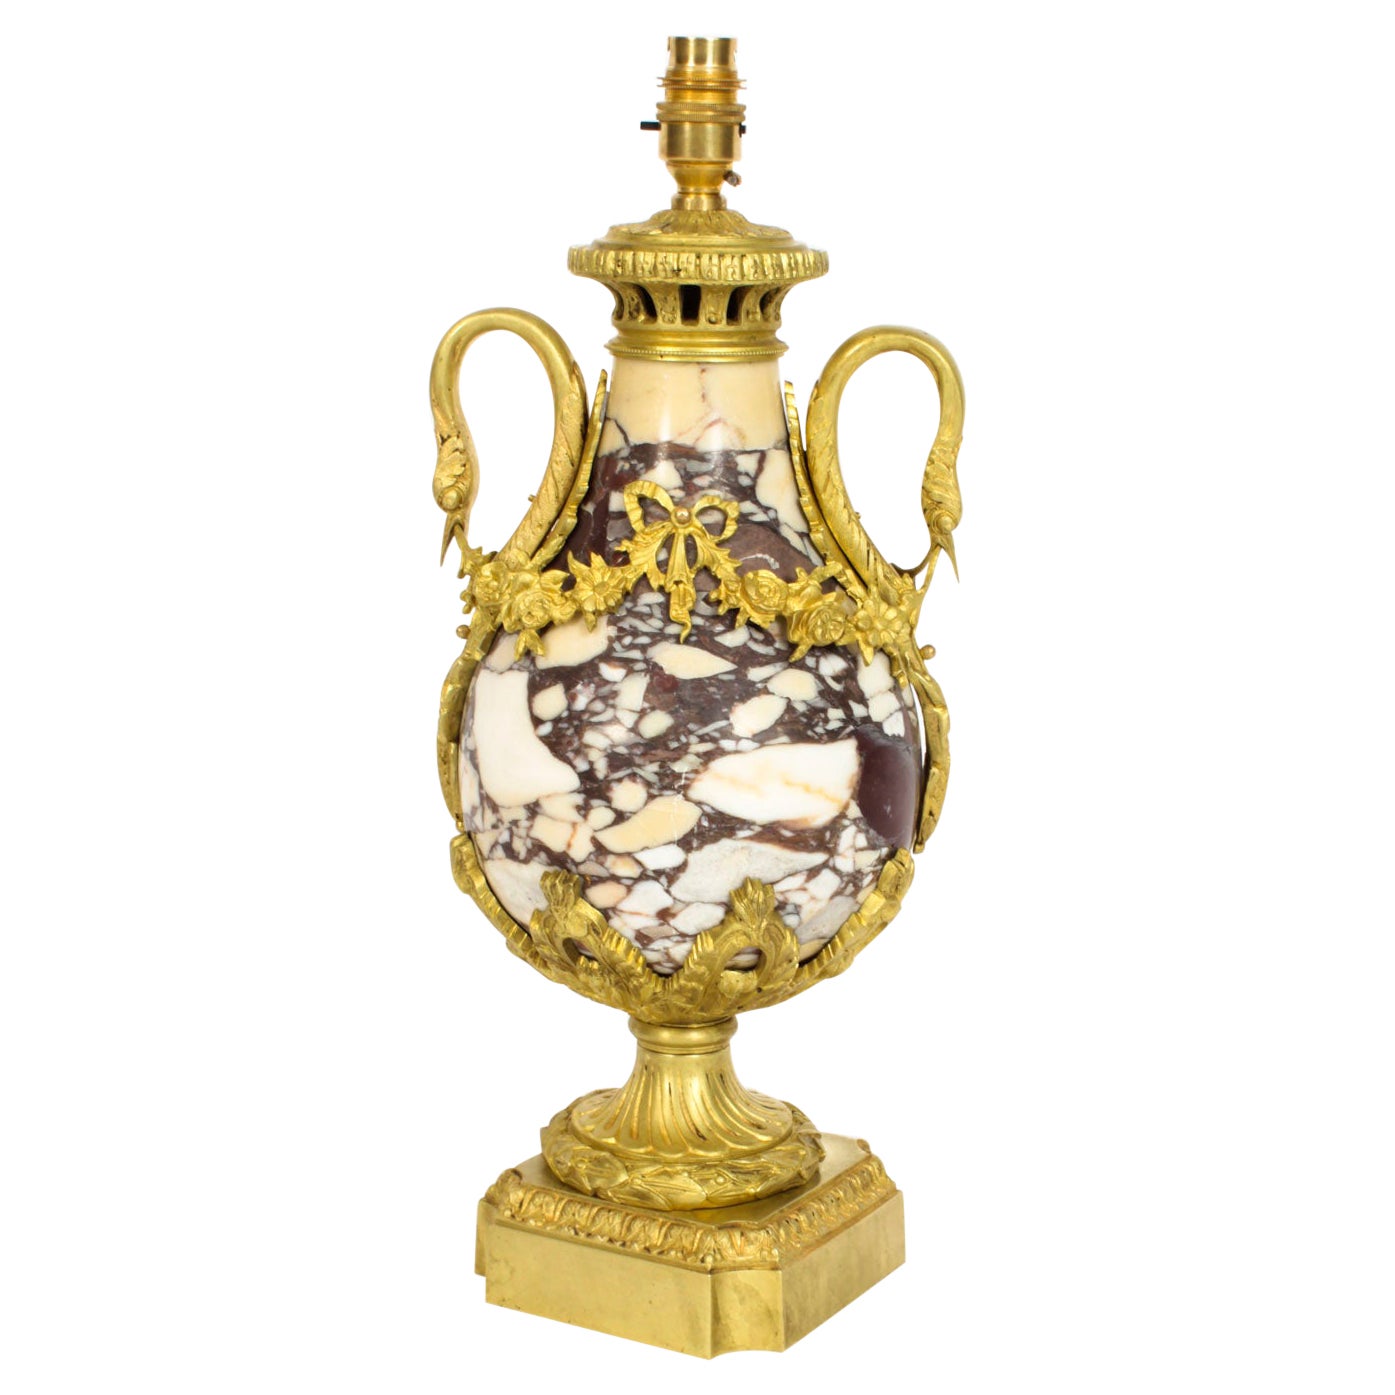 Antique French Louis XVI Revival Ormolu Mounted Marble Table Lamp 1860s For Sale